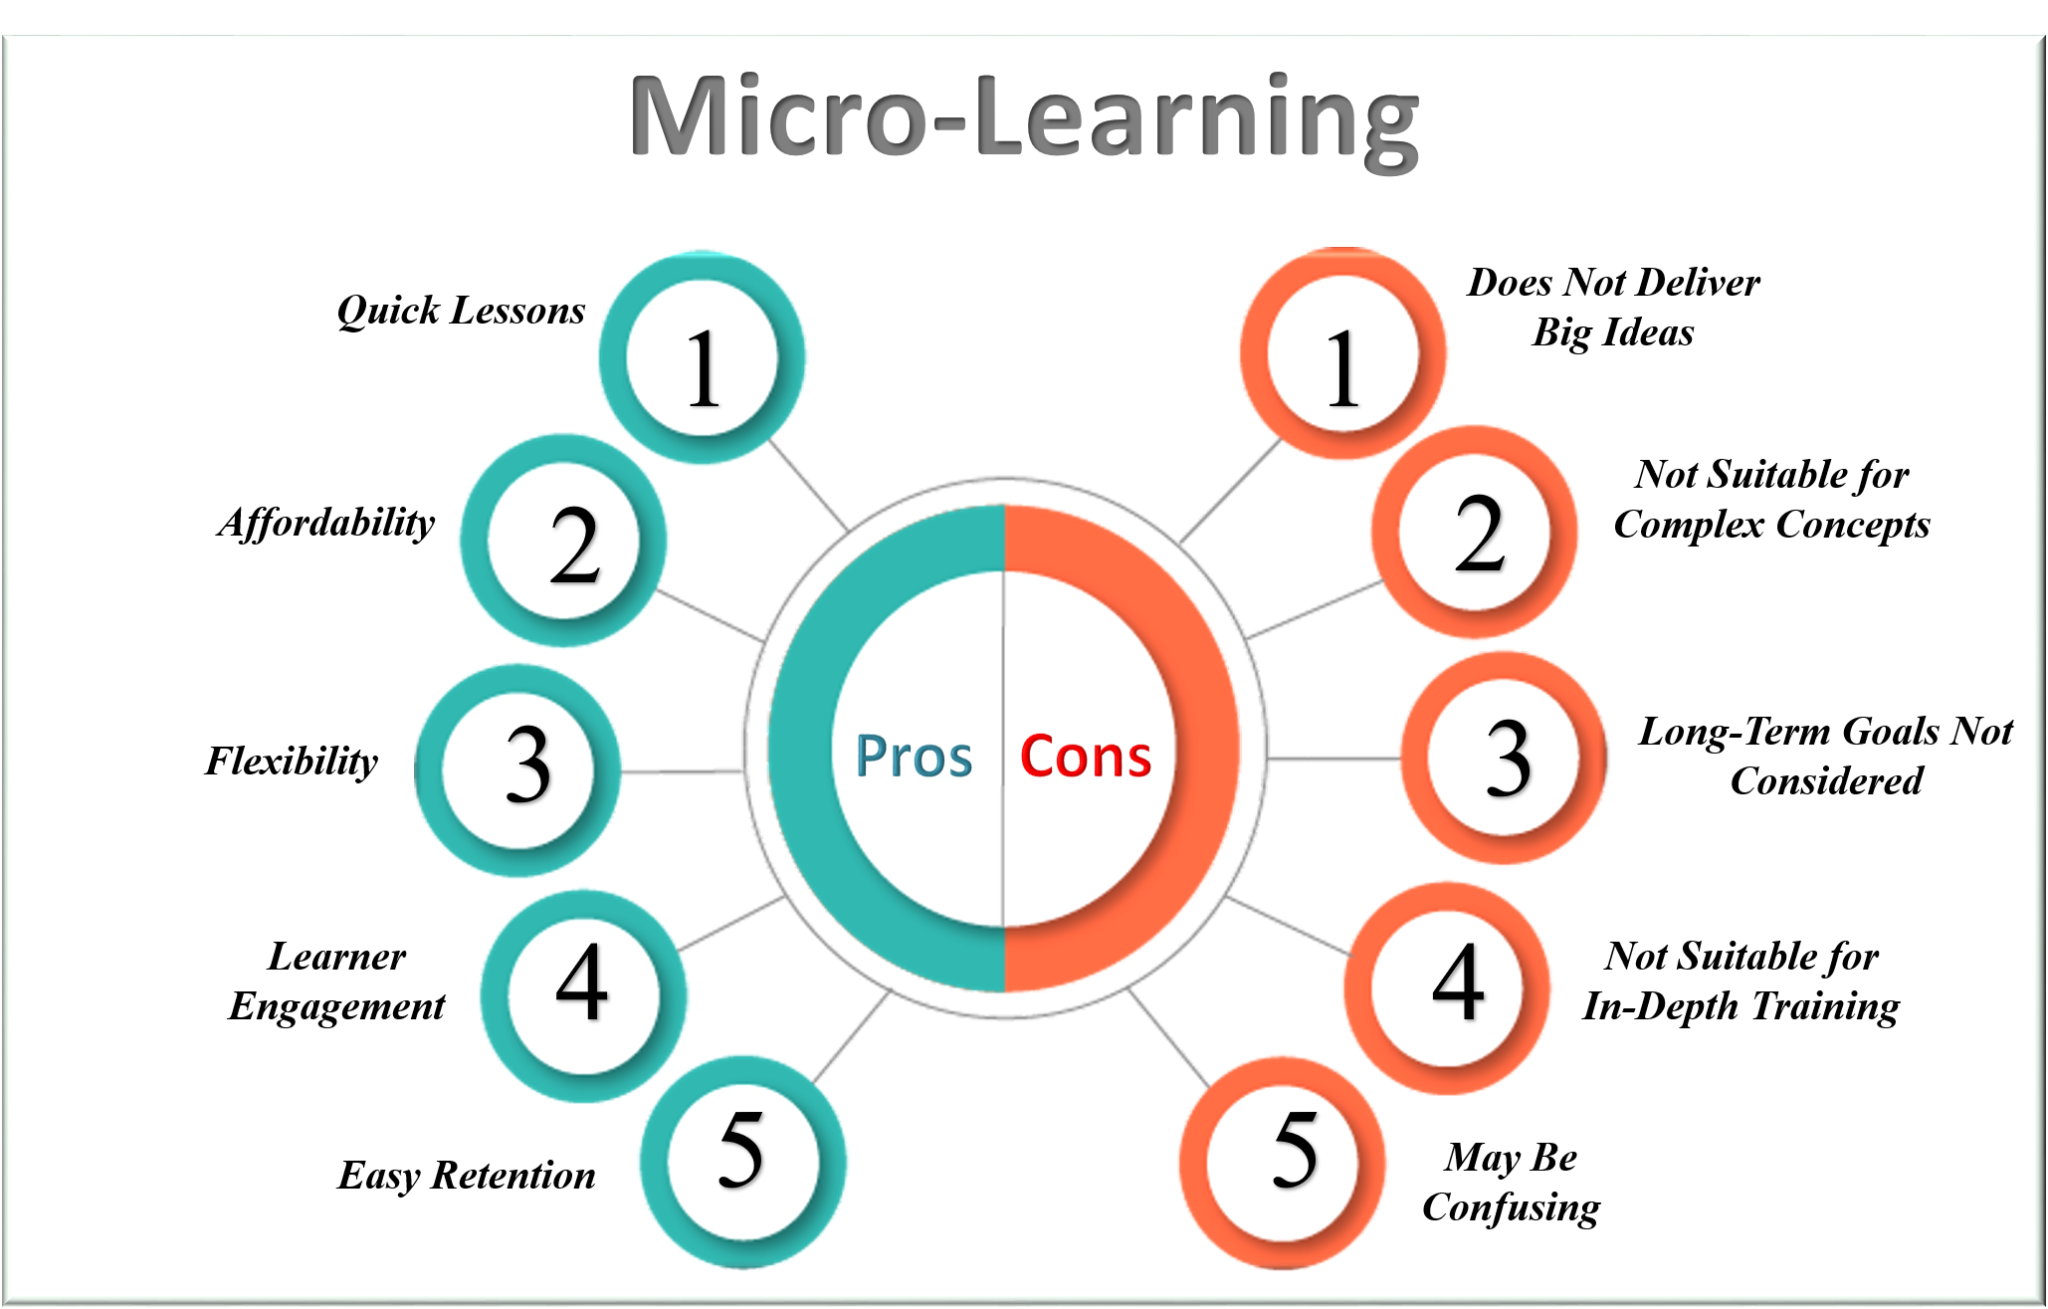 Pros & Cons of Micro-Learning